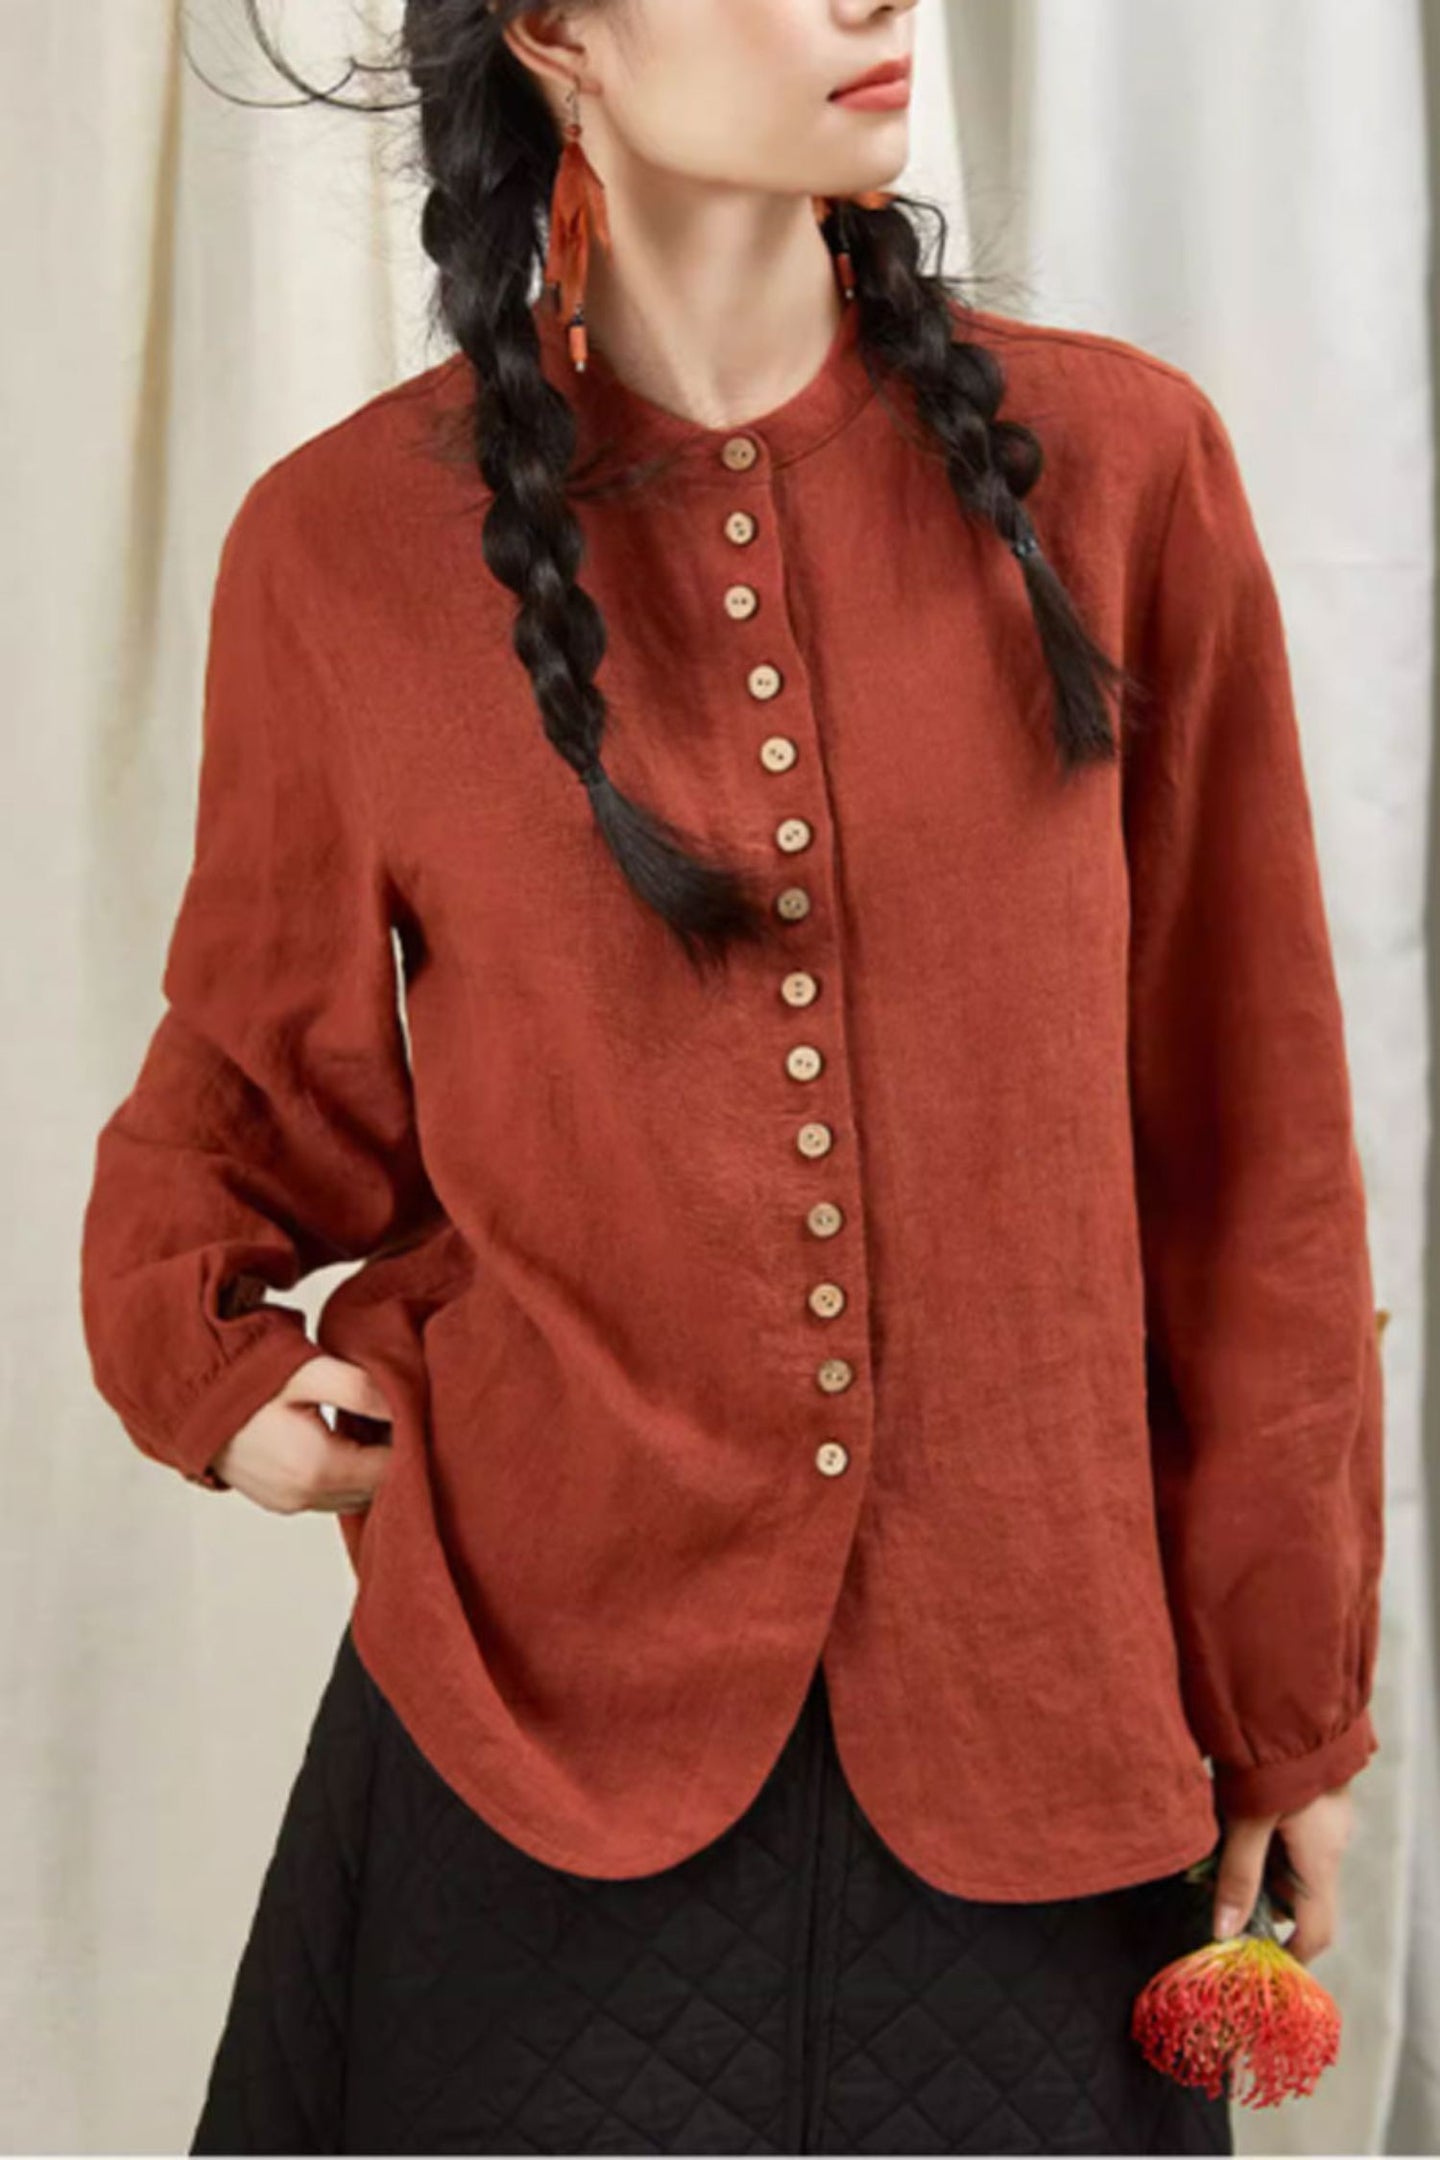 spring linen top women with long sleeves C3844